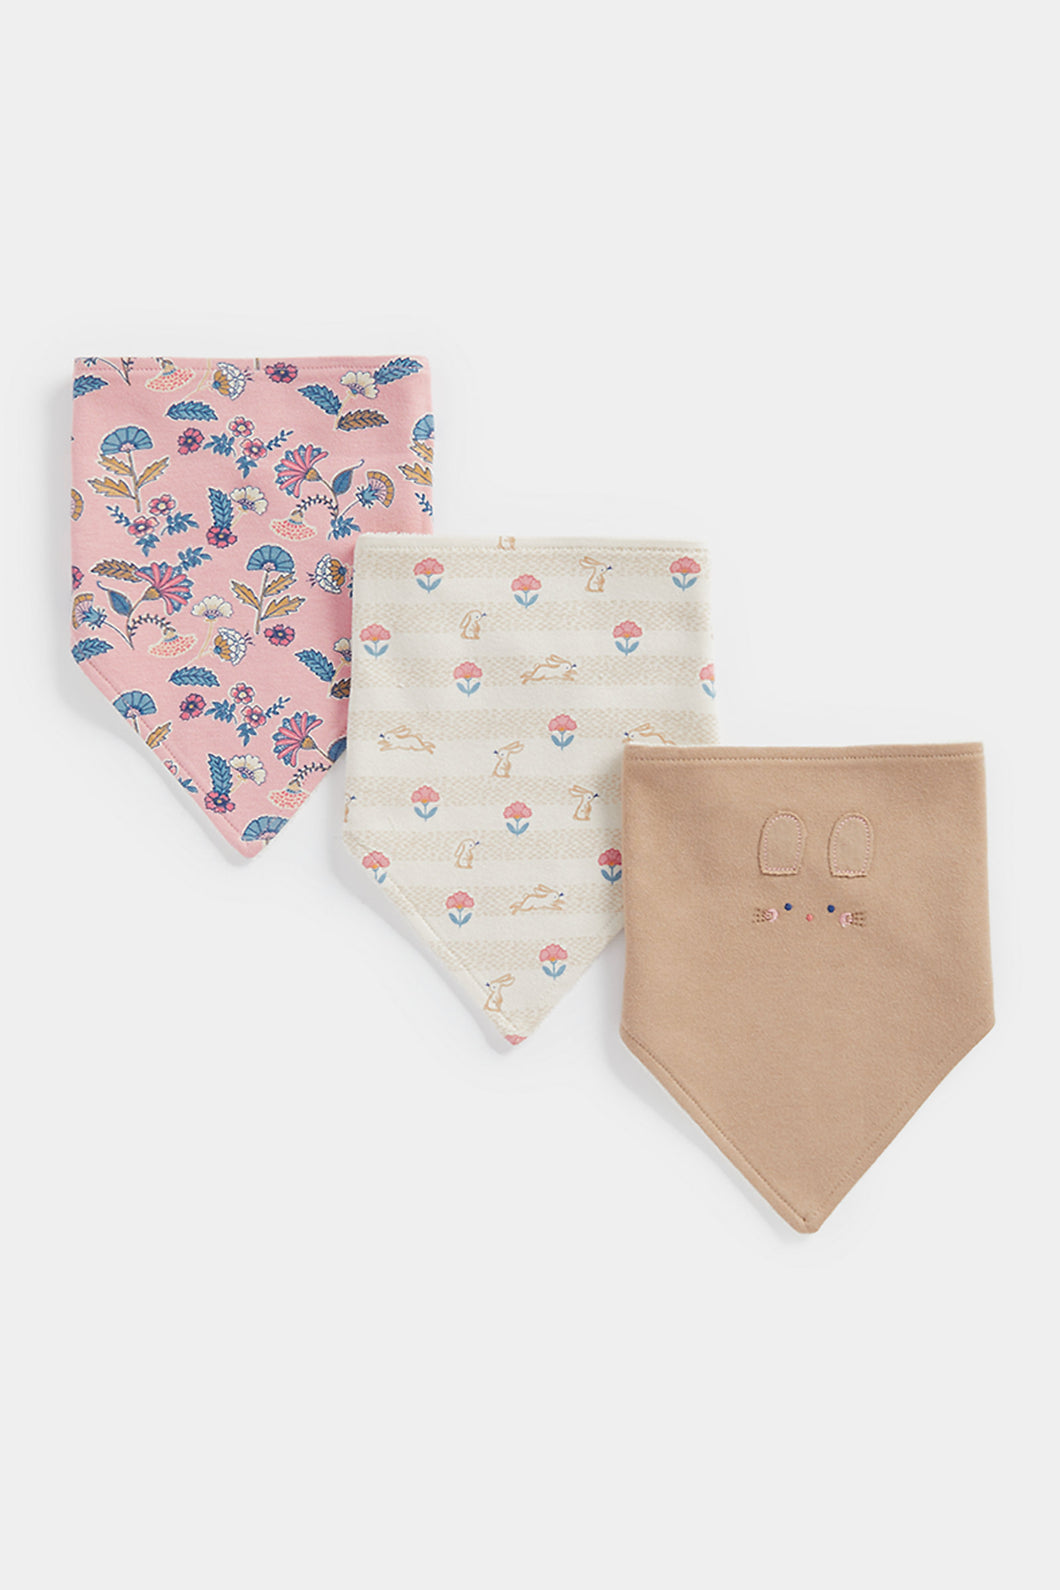 Mothercare Pink Bunny Bibs -3 Pack